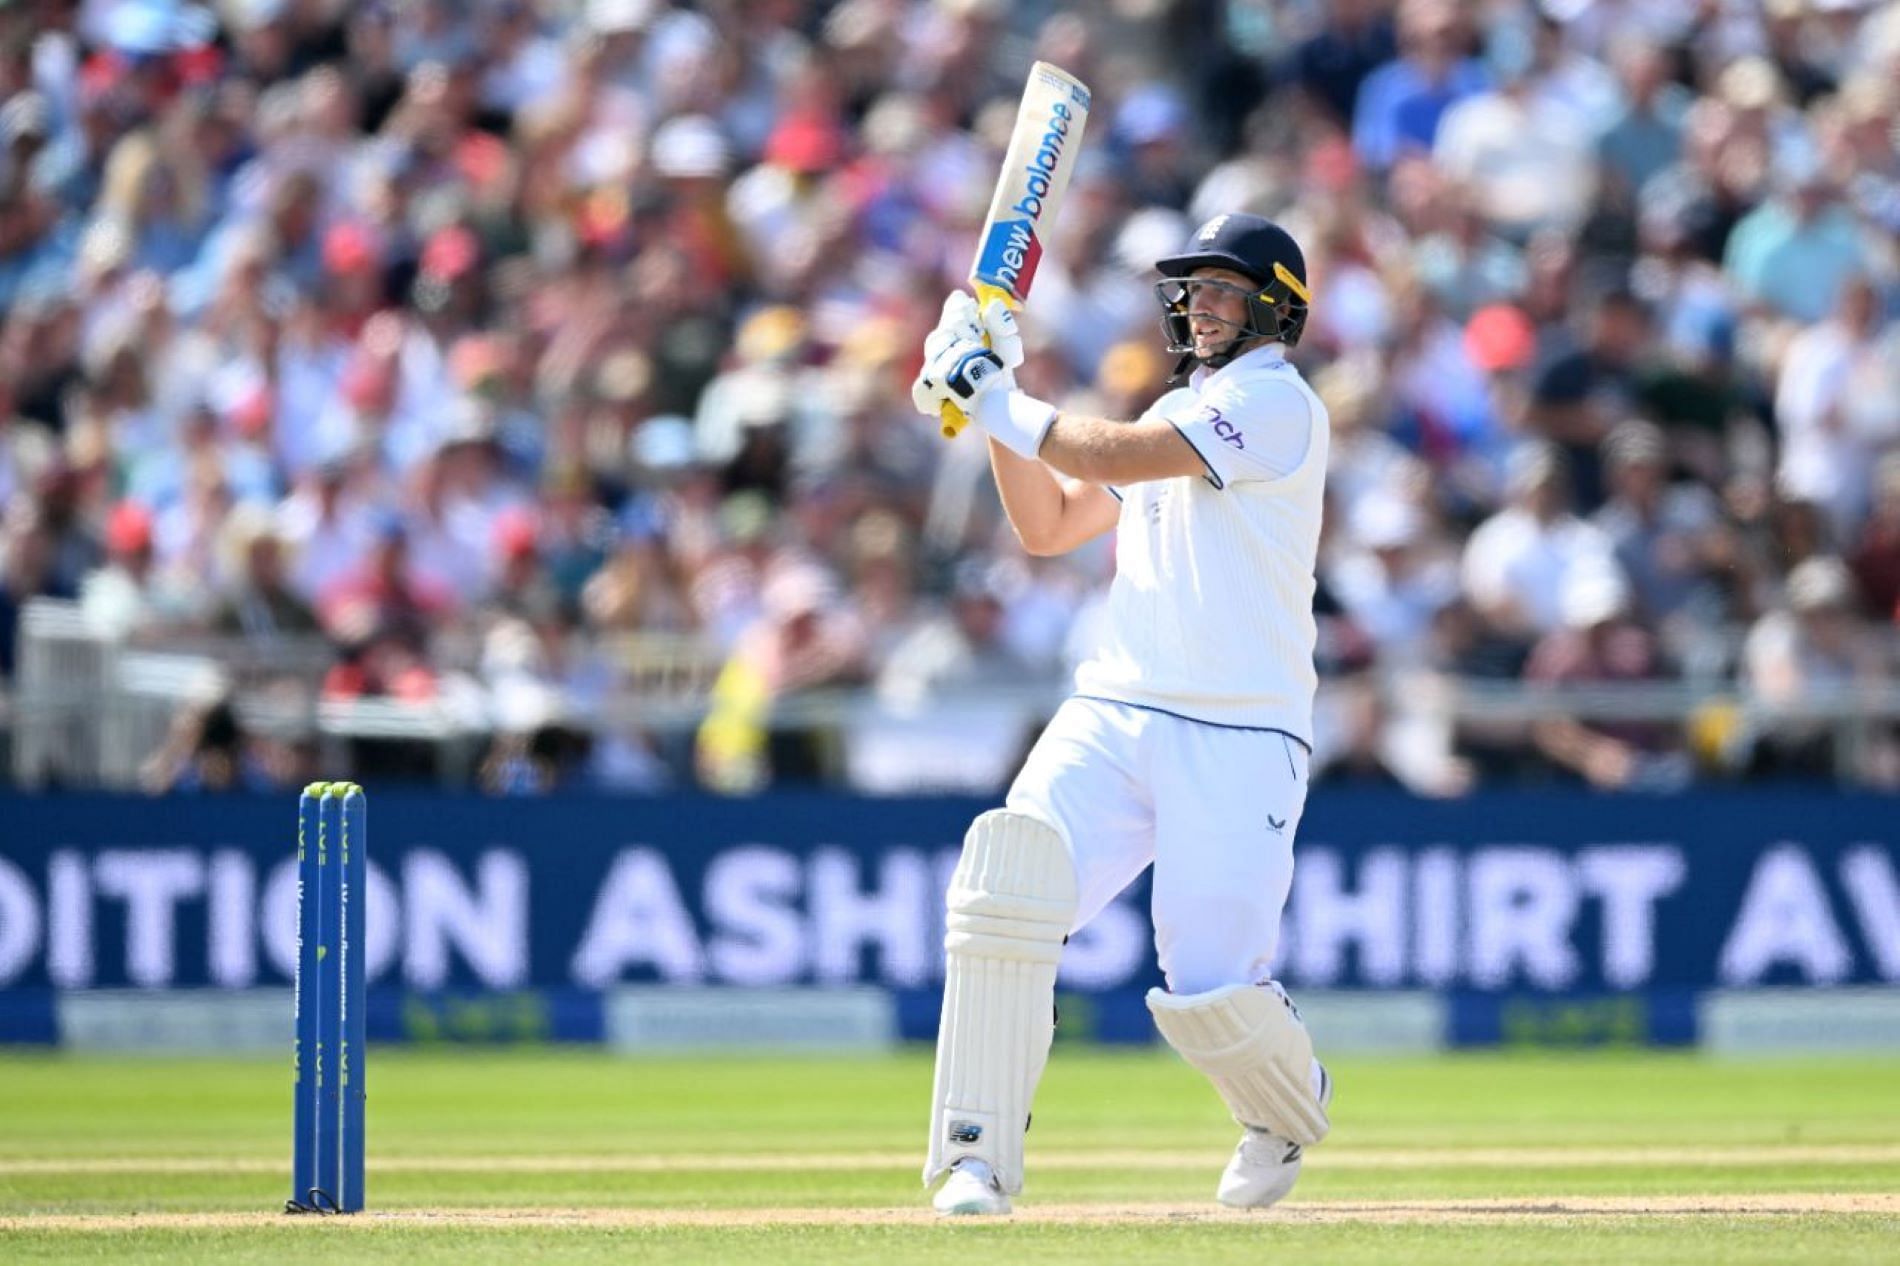 Joe Root launched a brutal attack on the Aussie lineup on Day 1 at Manchester